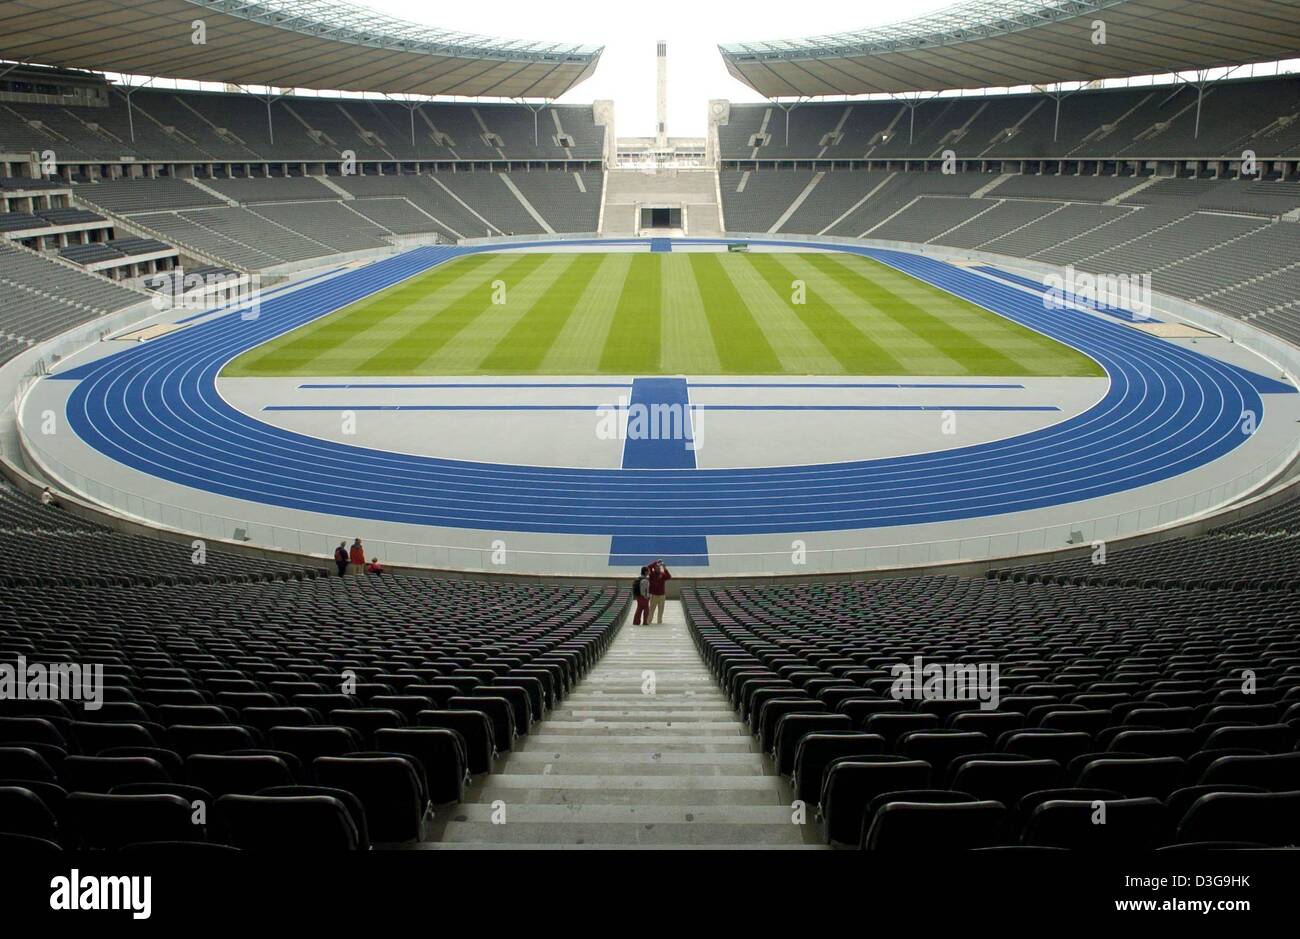 (dpa) - View of the inside of Olympic Stadium in Berlin, Germany, 27 August 2004. The stadium, which was originally built for the infamous 1936 Olympic Games that were used as a propaganda show by the Nazi regime, has been renovated at a cost of 240 million euros. The stadium, which now offers roofed seats for 76,000 spectators, will be the site of the FIFA Soccer World Cup final i Stock Photo